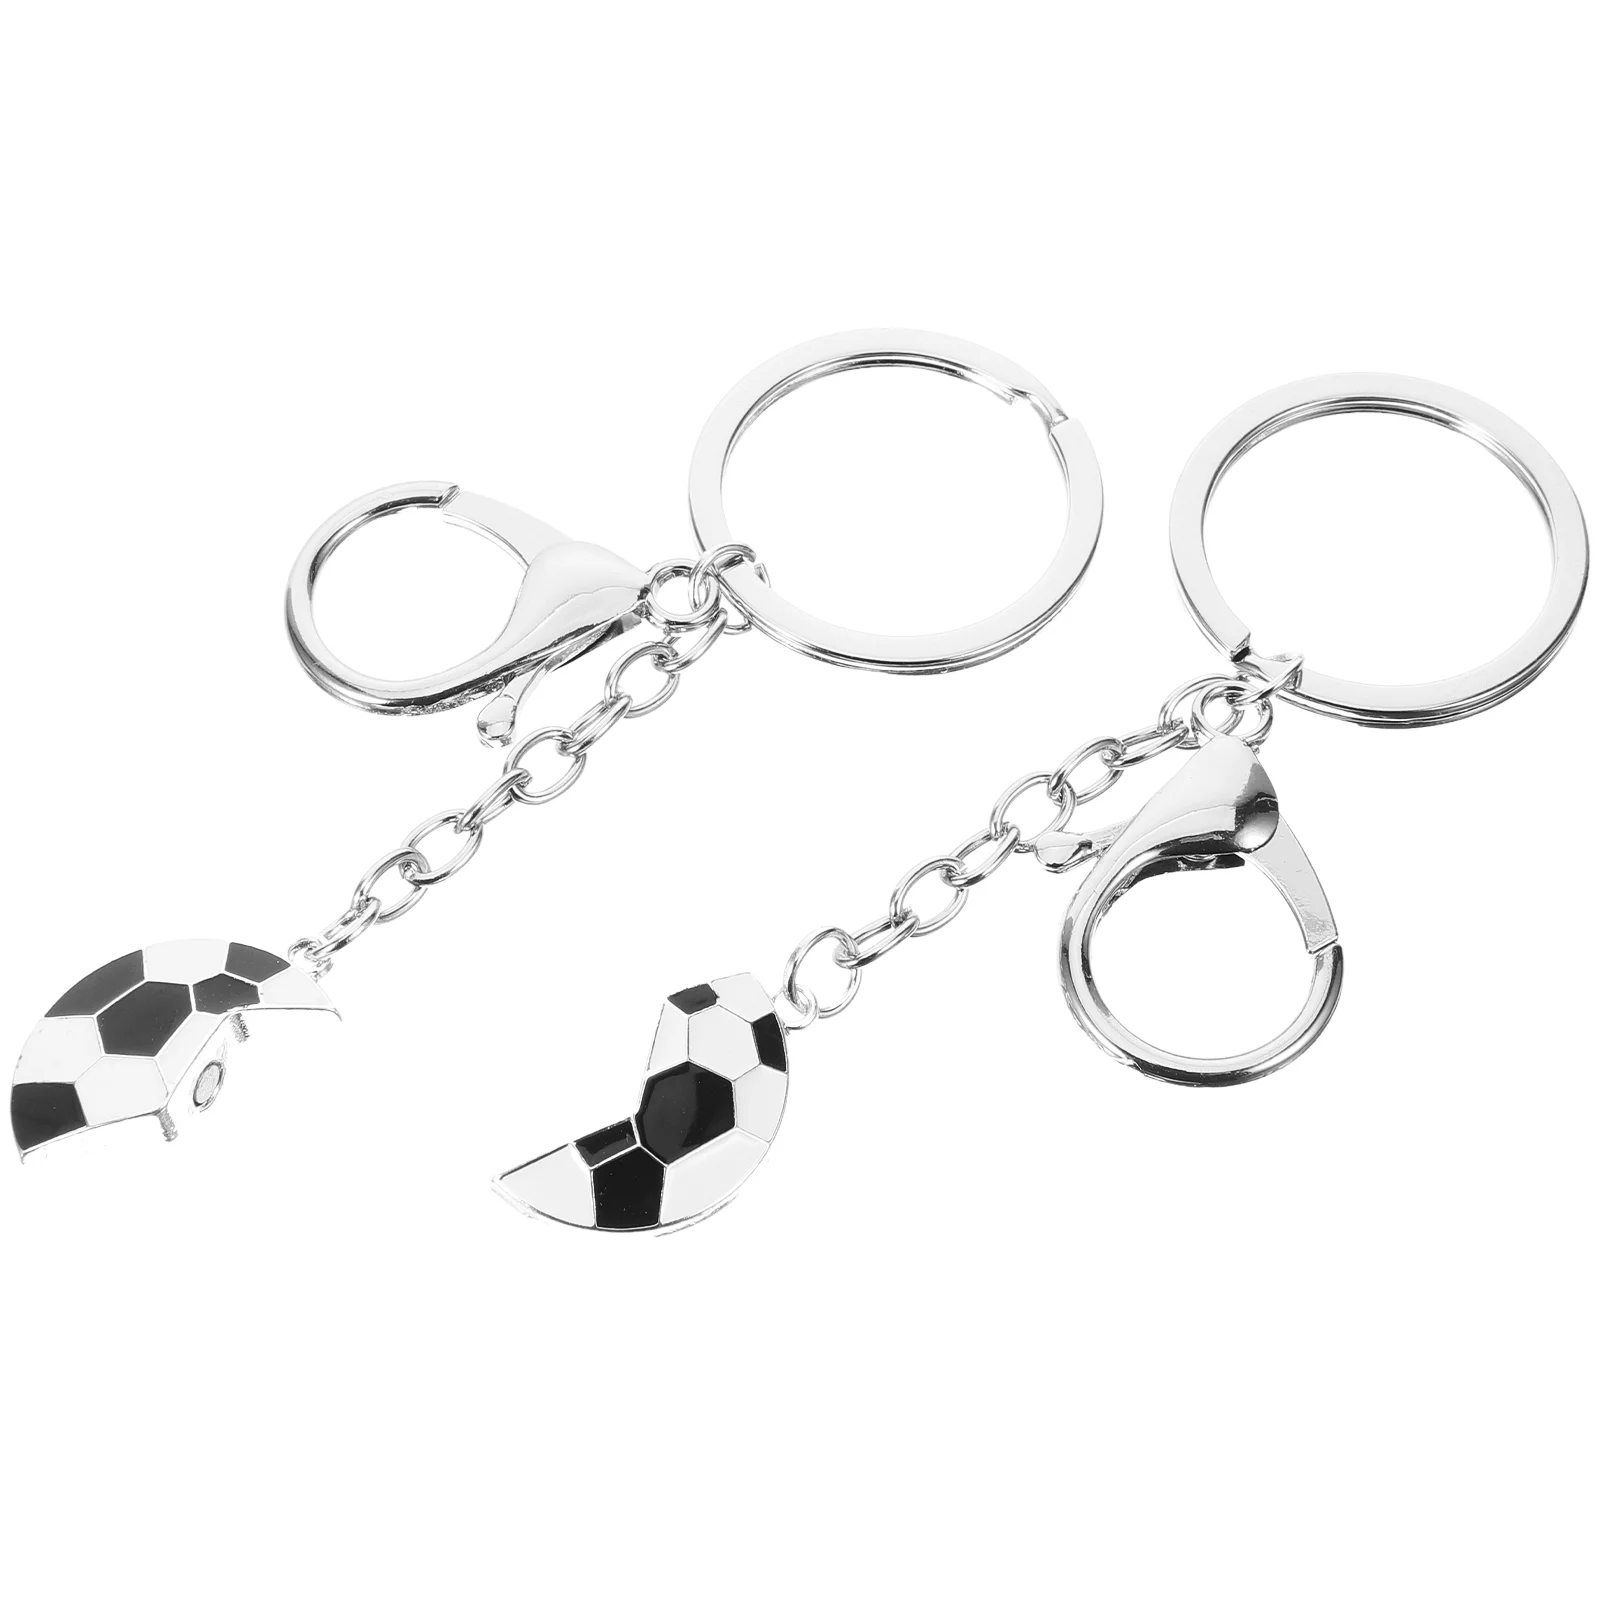 

Football Keychain Sports Decoration Holder Ring Chains Bag Pendant Hanging Alloy Charm Utility